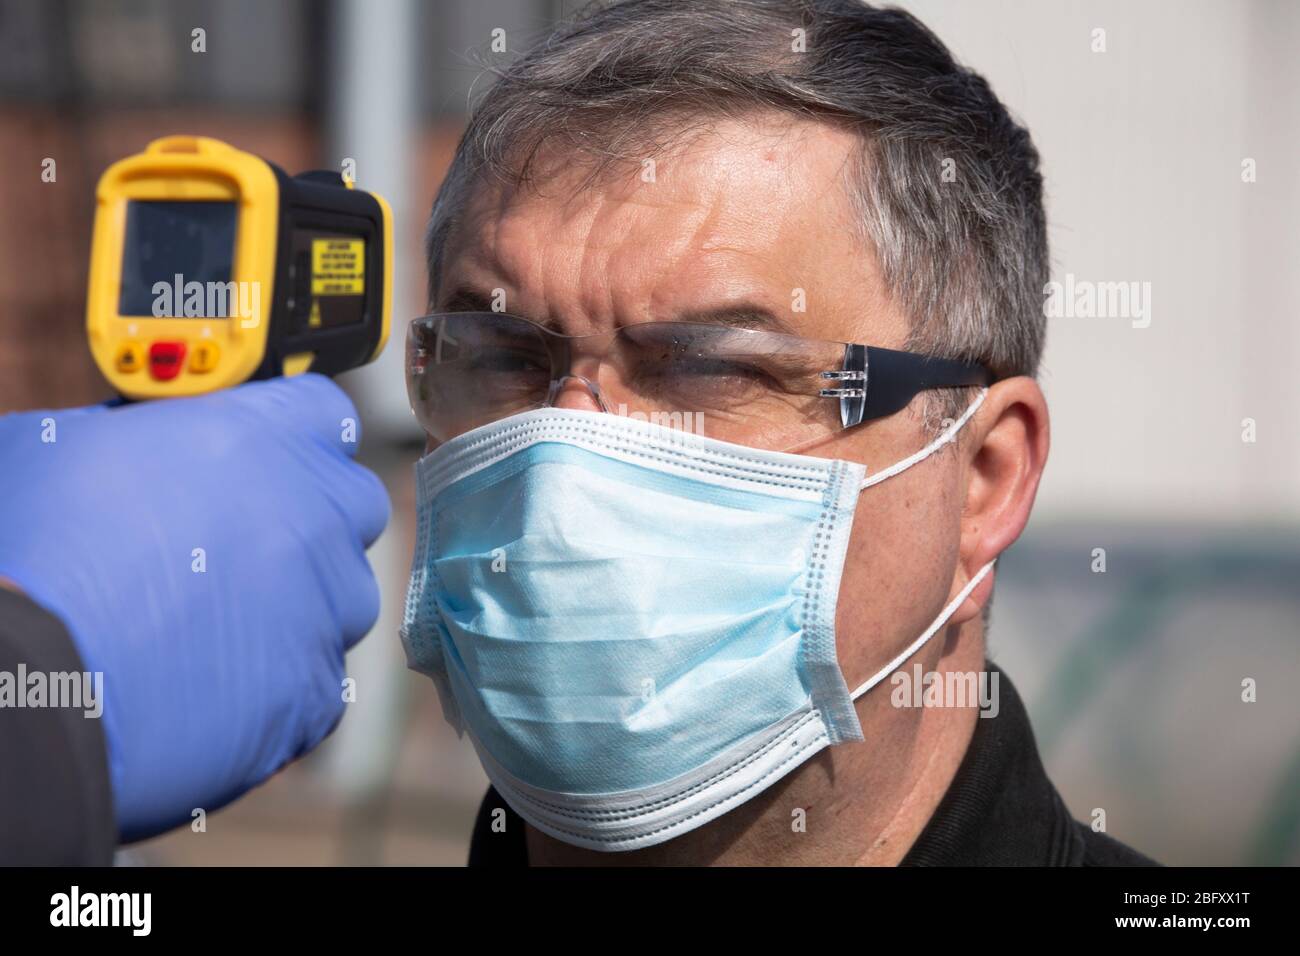 A member of staff at the Vauxhall car factory photographed having his temperature read during preparedness tests and redesign ahead of re-opening following the COVID-19 outbreak. Located in Ellesmere Port, Wirral, the factory opened in 1962 and currently employs around 1100 workers. It ceased production on 17 March 2020 and will only resume work upon the advice of the UK Government, which will involve stringent physical distancing measures being in place across the site. Stock Photo